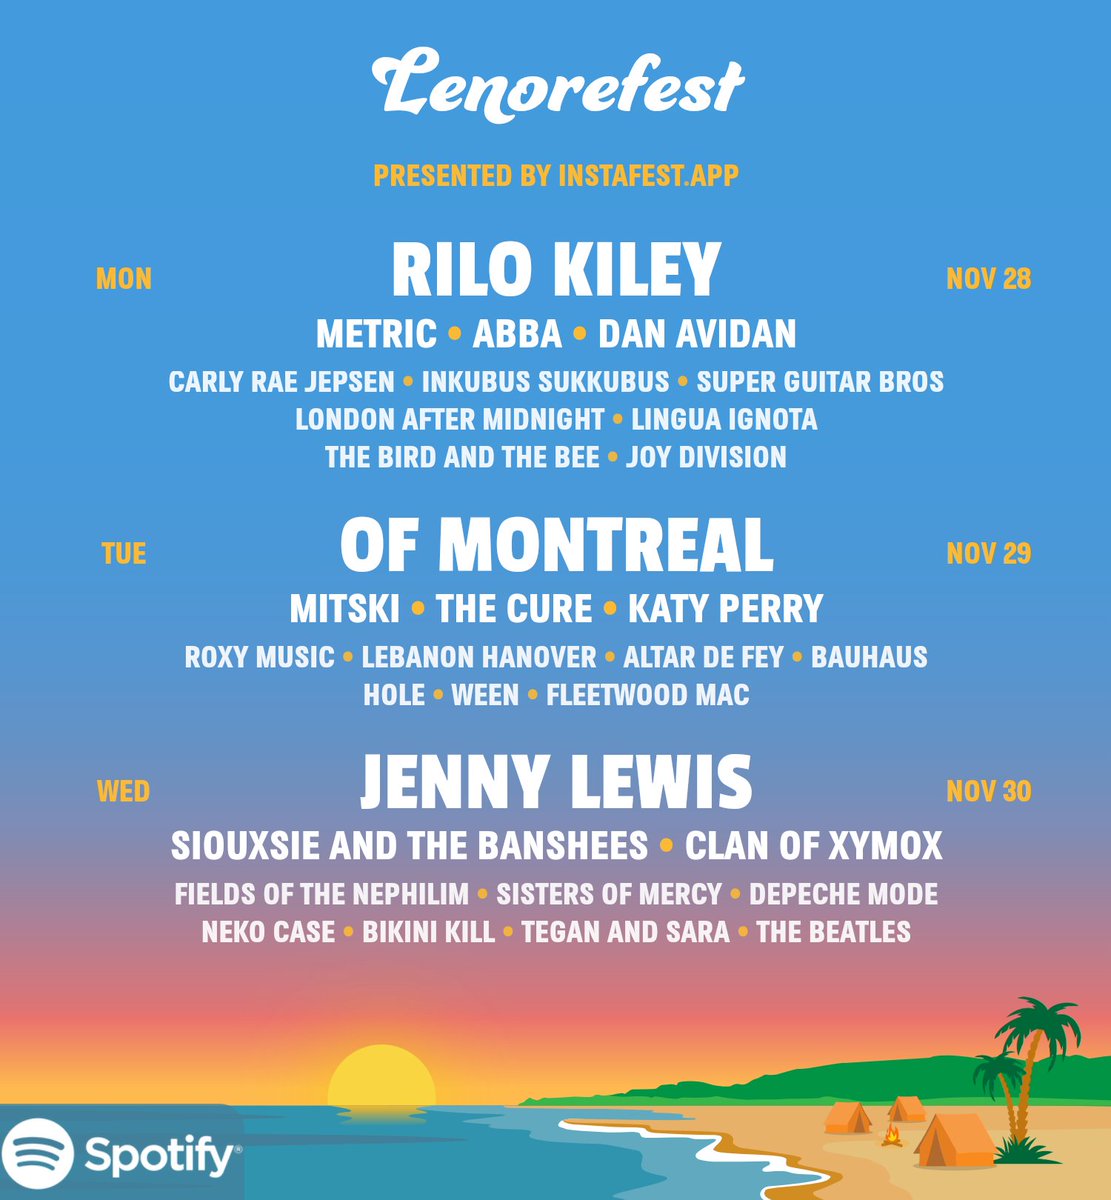 How r we getting Rilo Kiley and Jenny Lewis in the same lineup... https://t.co/cqhNWk3XGn